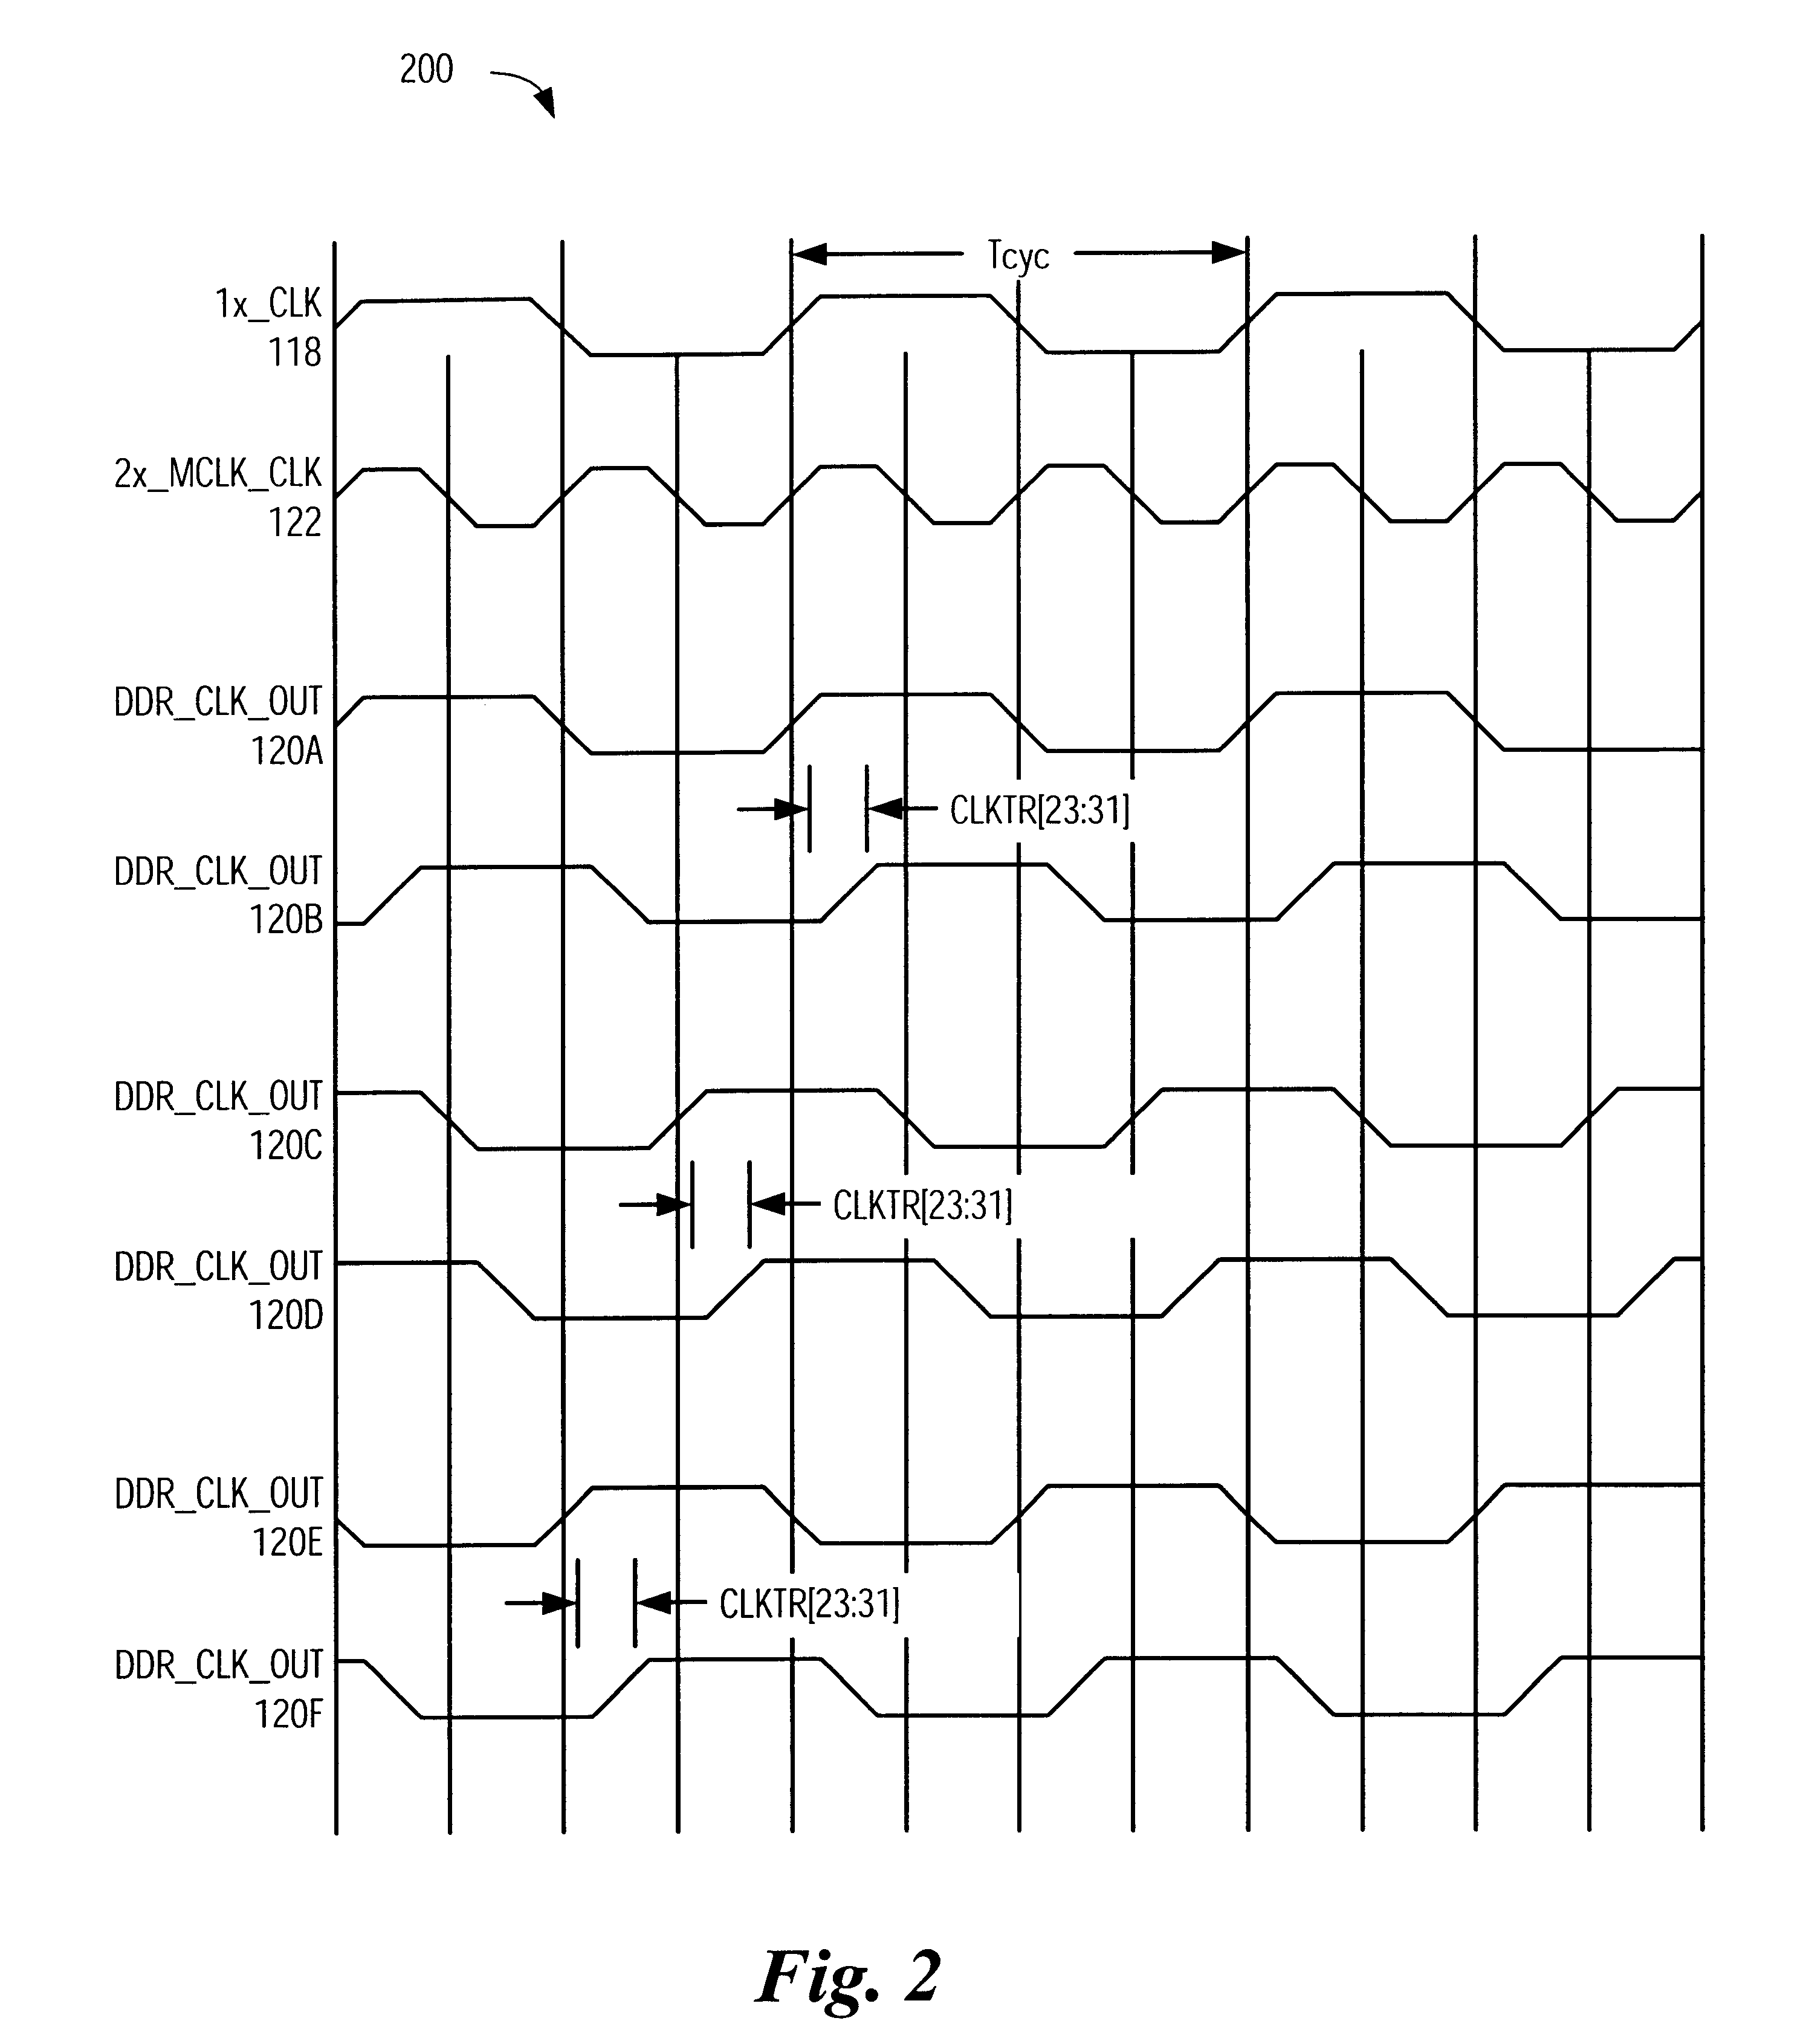 Memory clock generation with configurable phase advance and delay capability